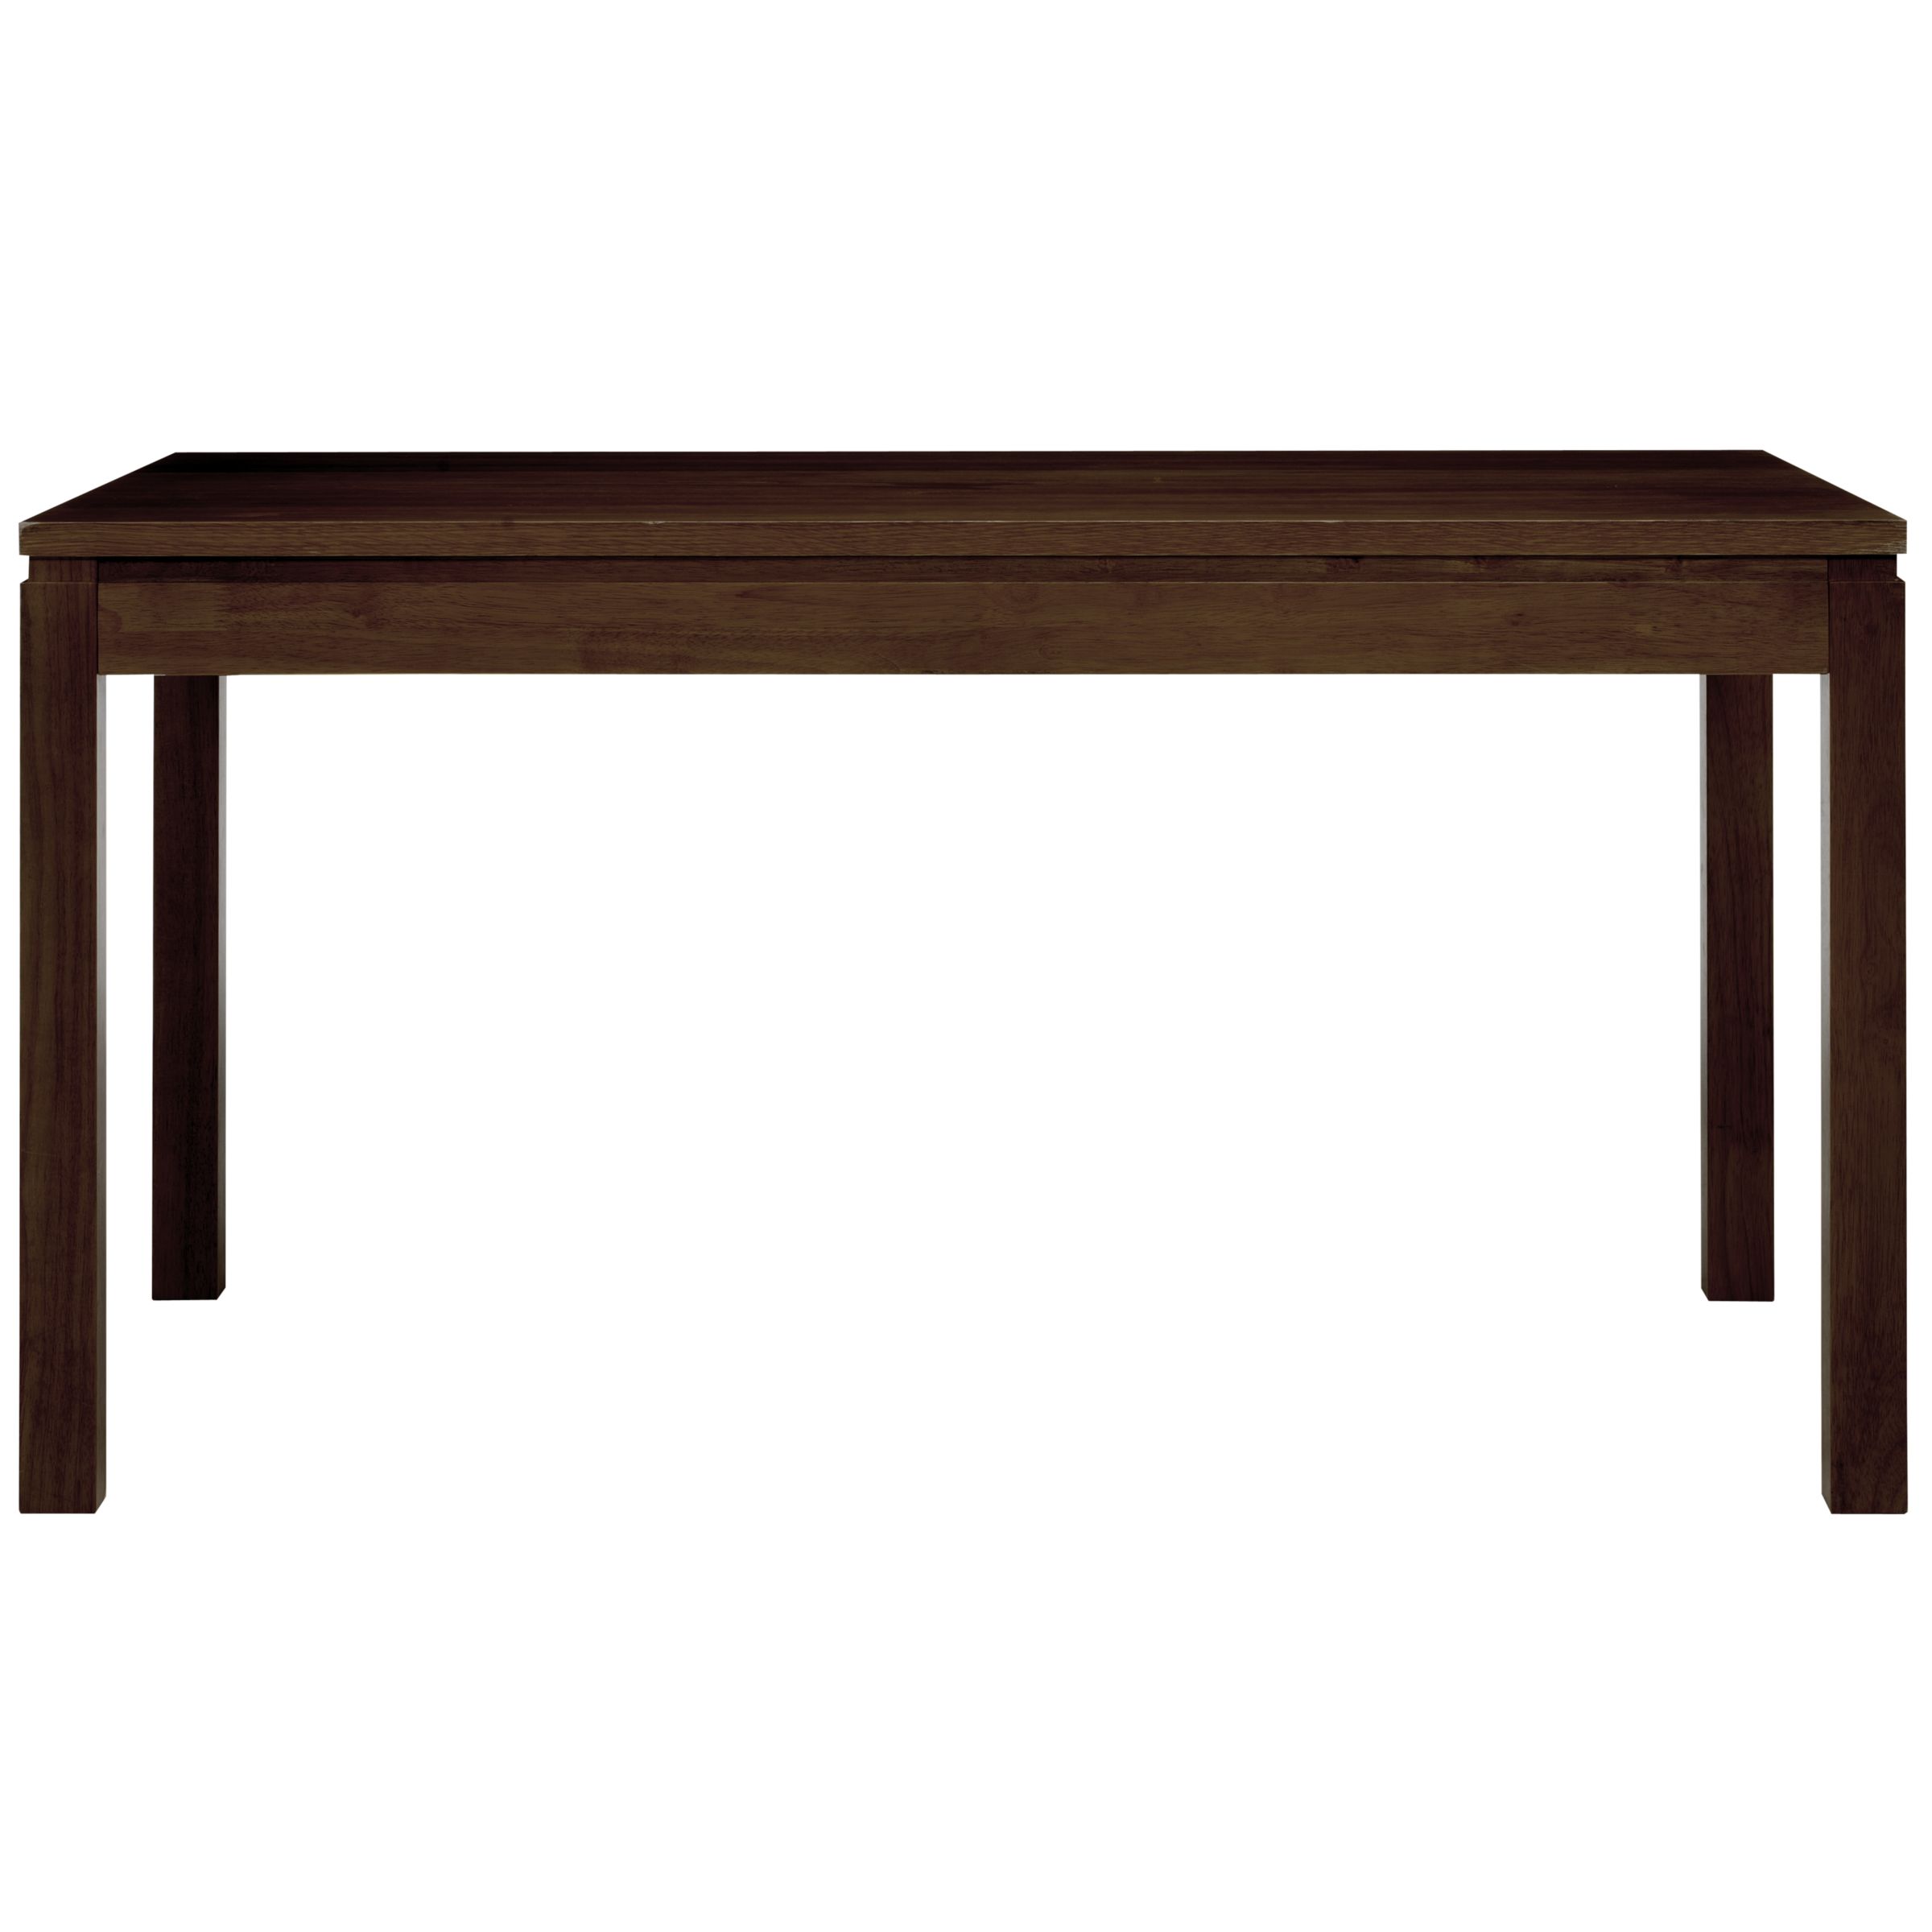 Hereford Dining Table, Dark at JohnLewis